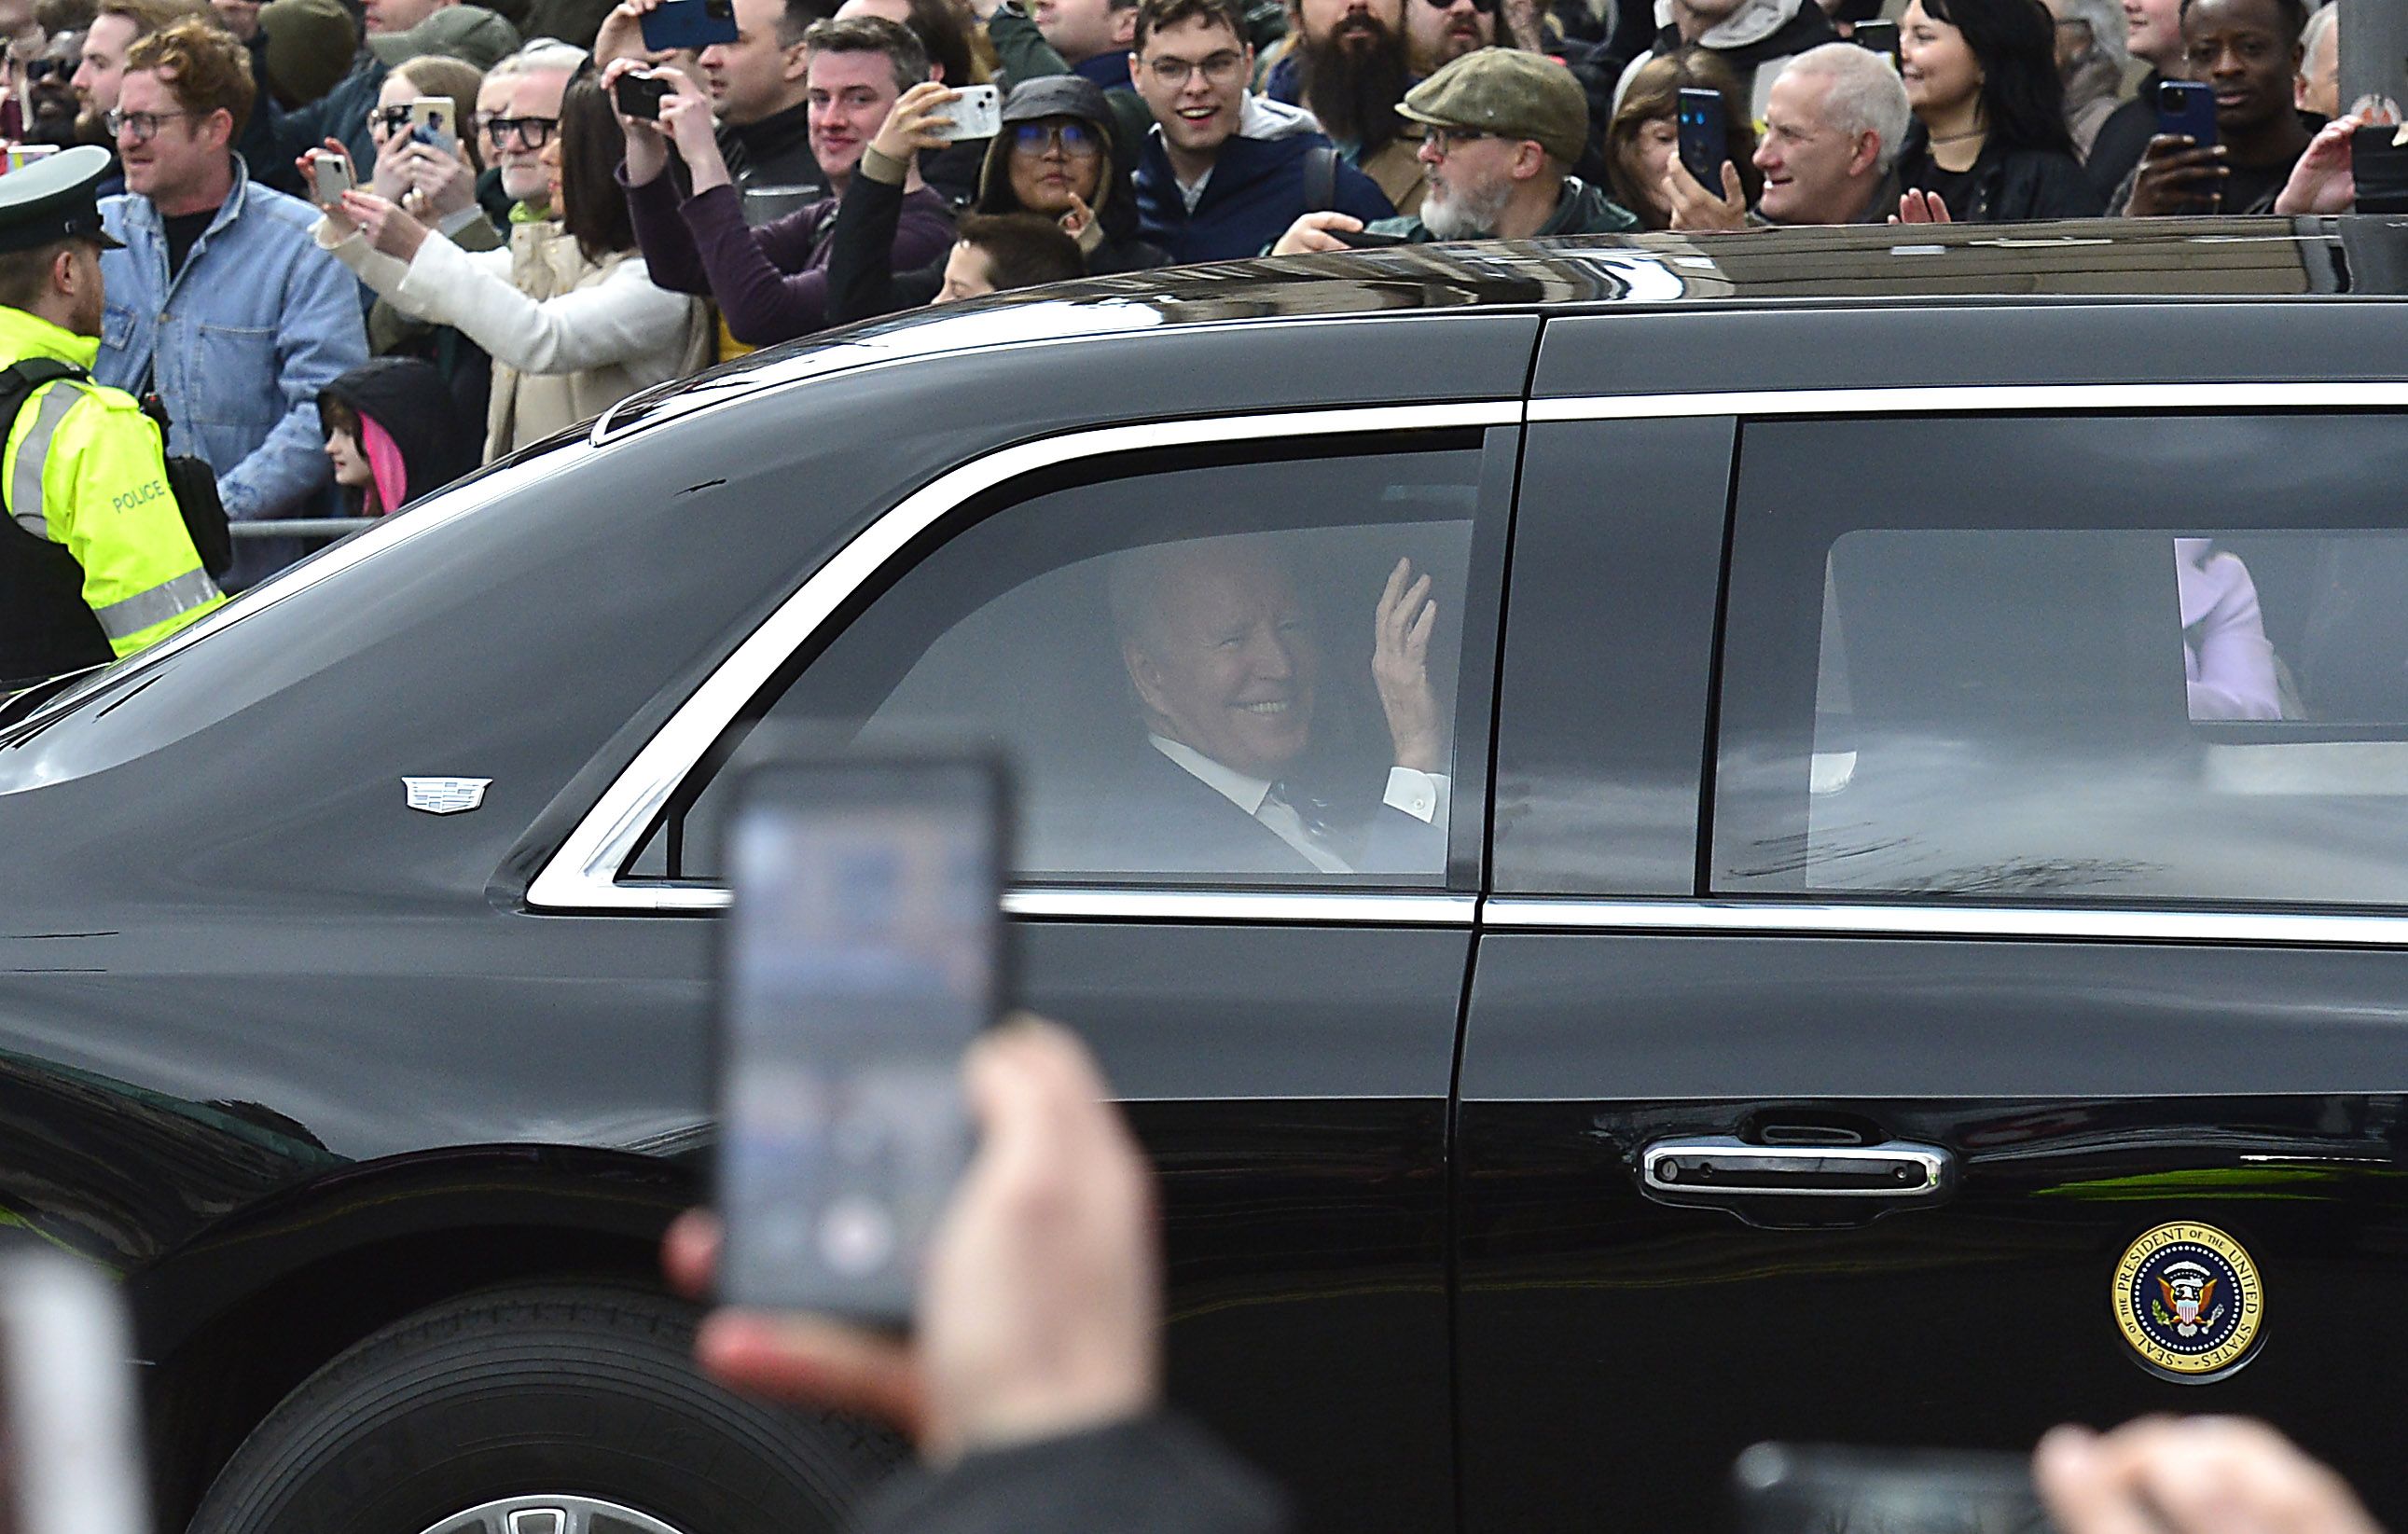 ARRIVAL: US President Joe Biden on his way to Ulster University in Belfast where he made his keynote speech, above